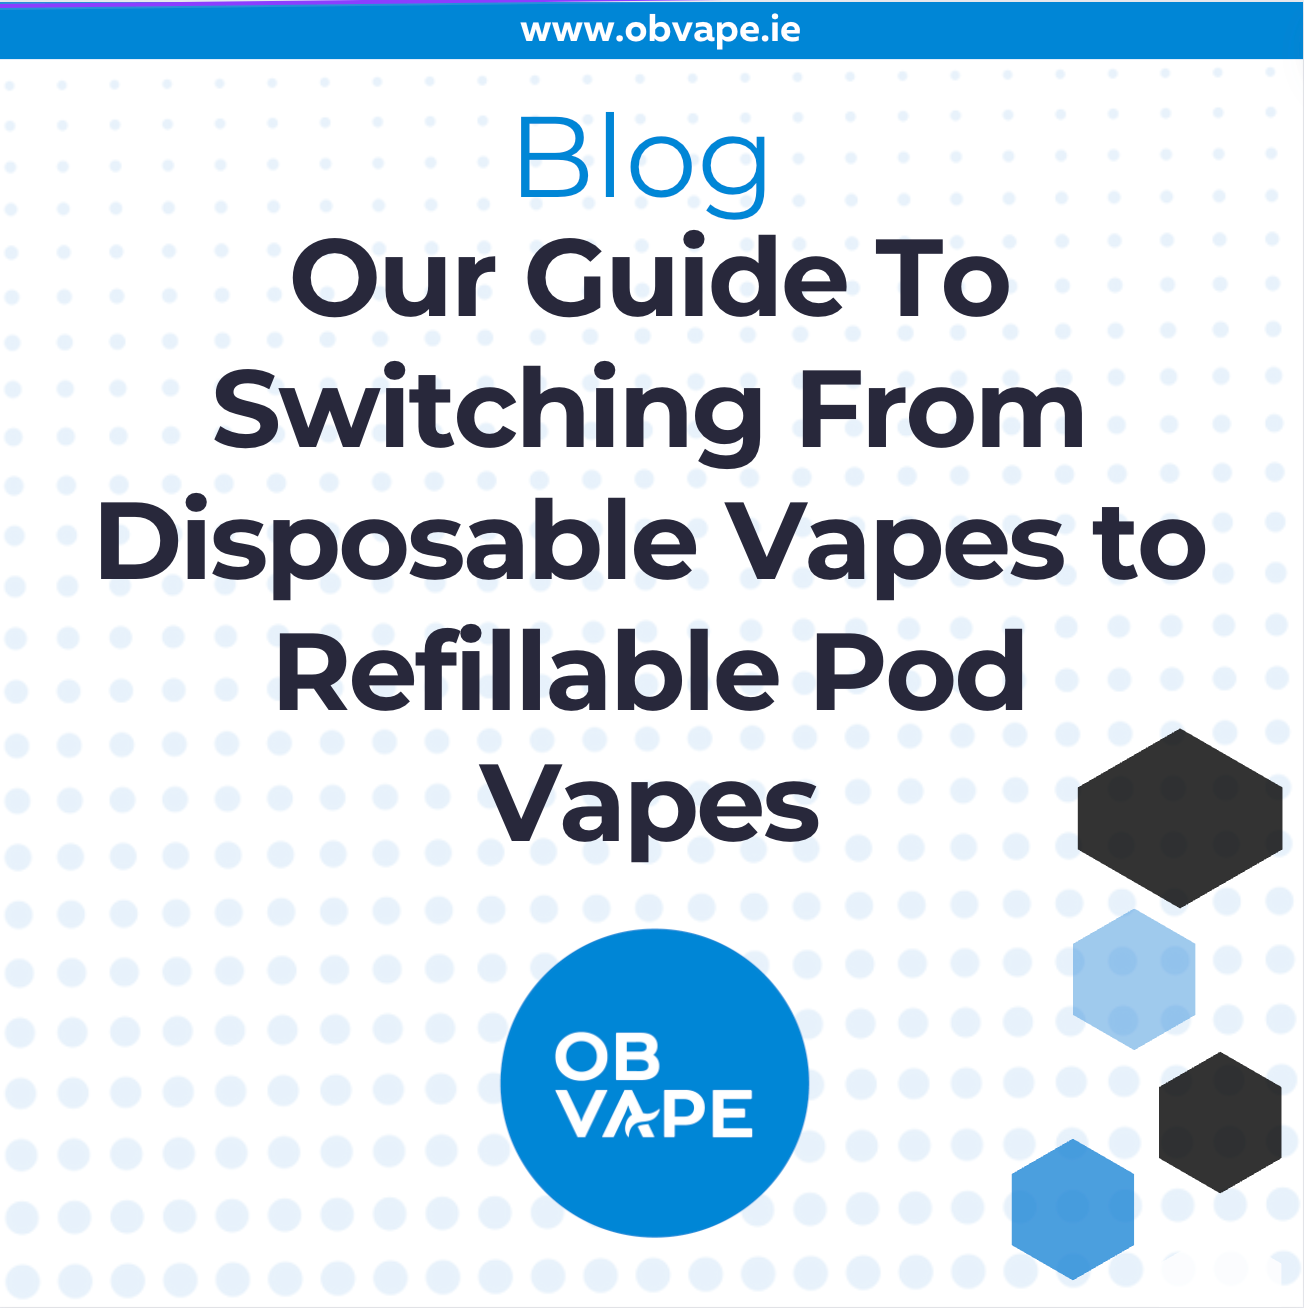 Our Guide To Switching From Disposable Vapes to Refillable Pod Vapes